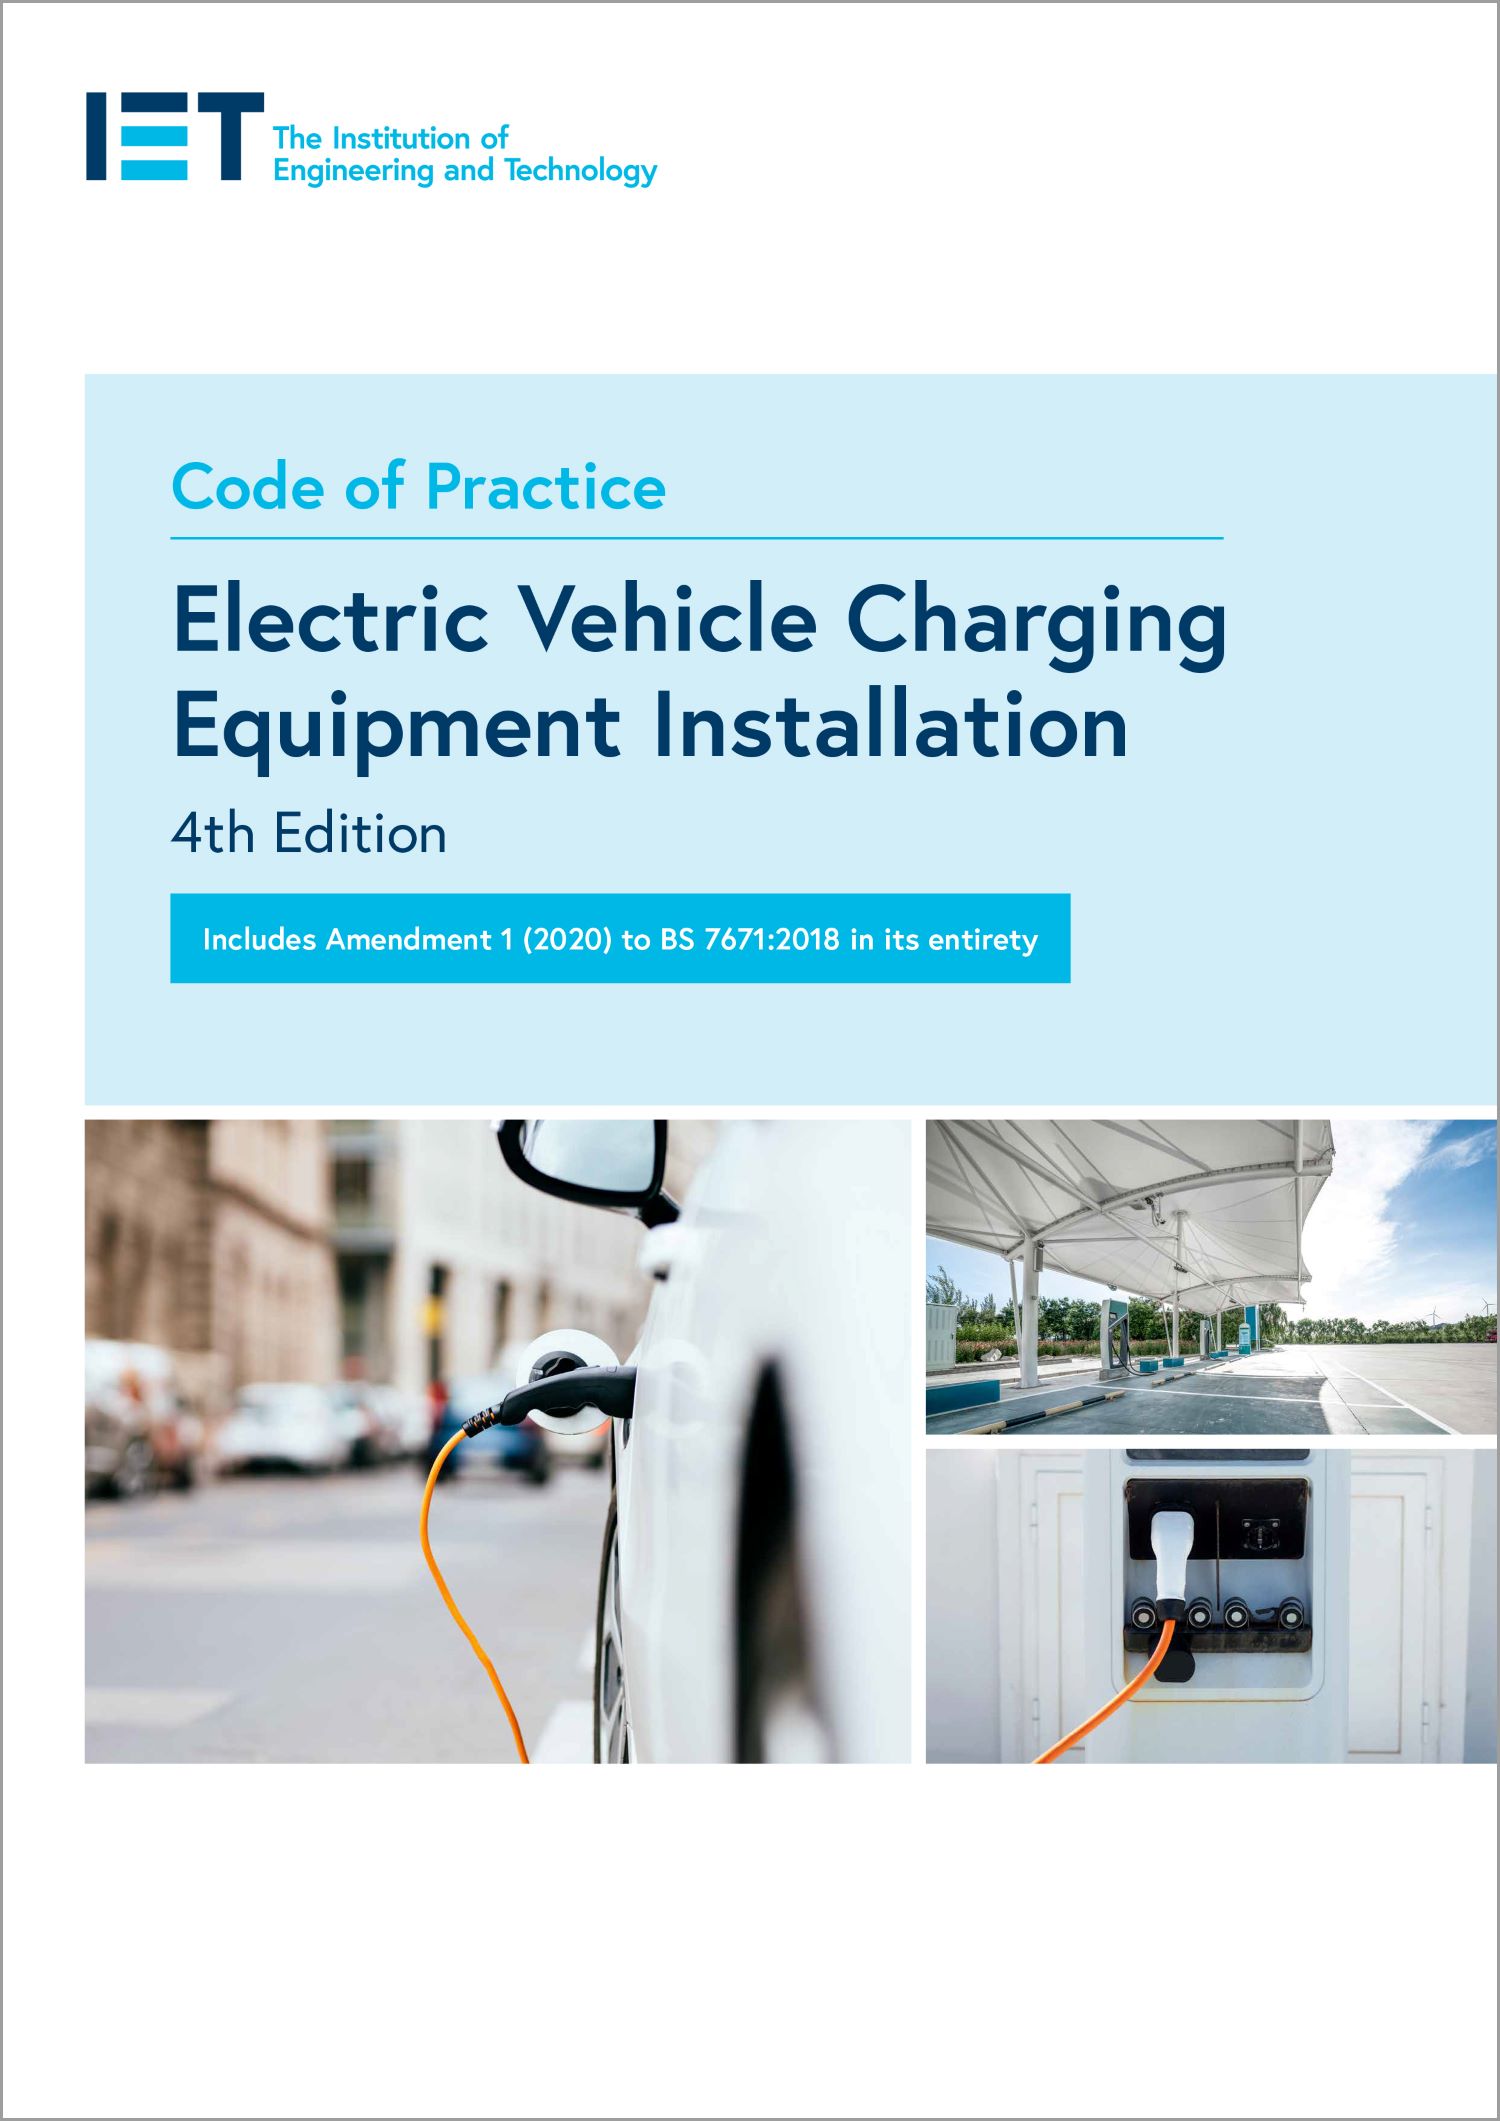 Code of Practice for Electric Vehicle Charging, 4th Edition